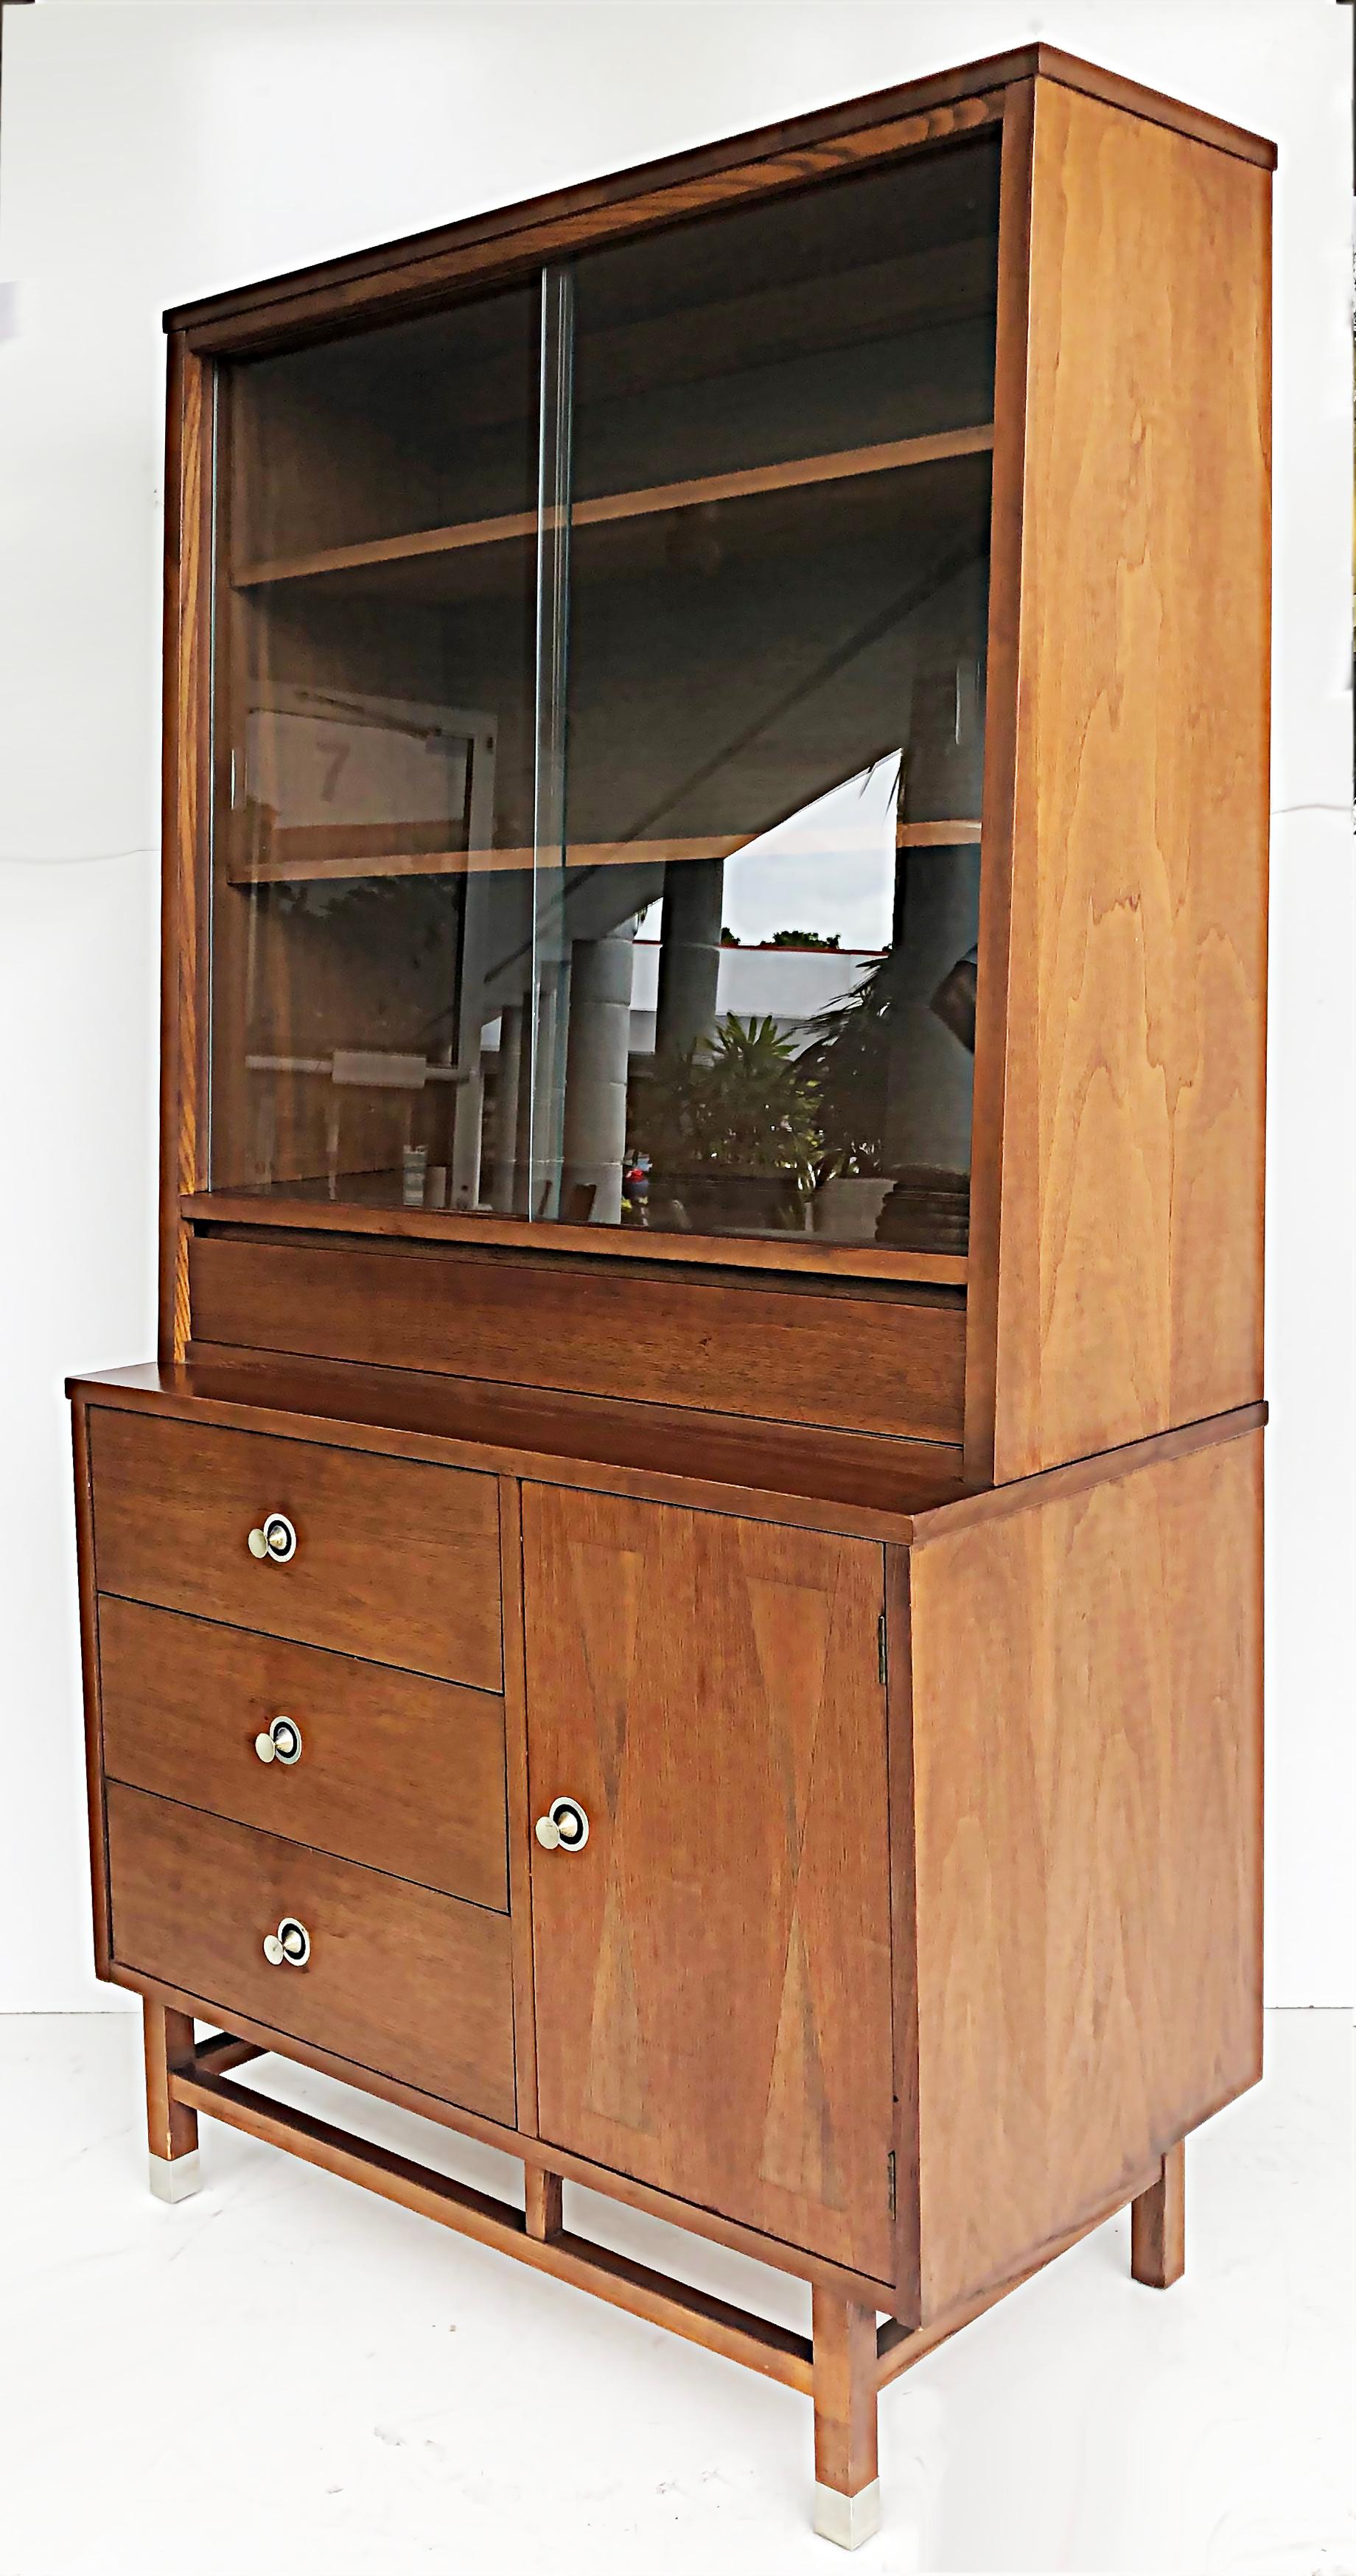 Stanley Furniture Mid-century Walnut Rosewood China cabinet by H Paul Browning

Offered for sale is a Mid-Century Modern walnut and rosewood parquetry china cabinet designed by H. Paul Browning for Stanley Furniture c1965. The top of the cabinet